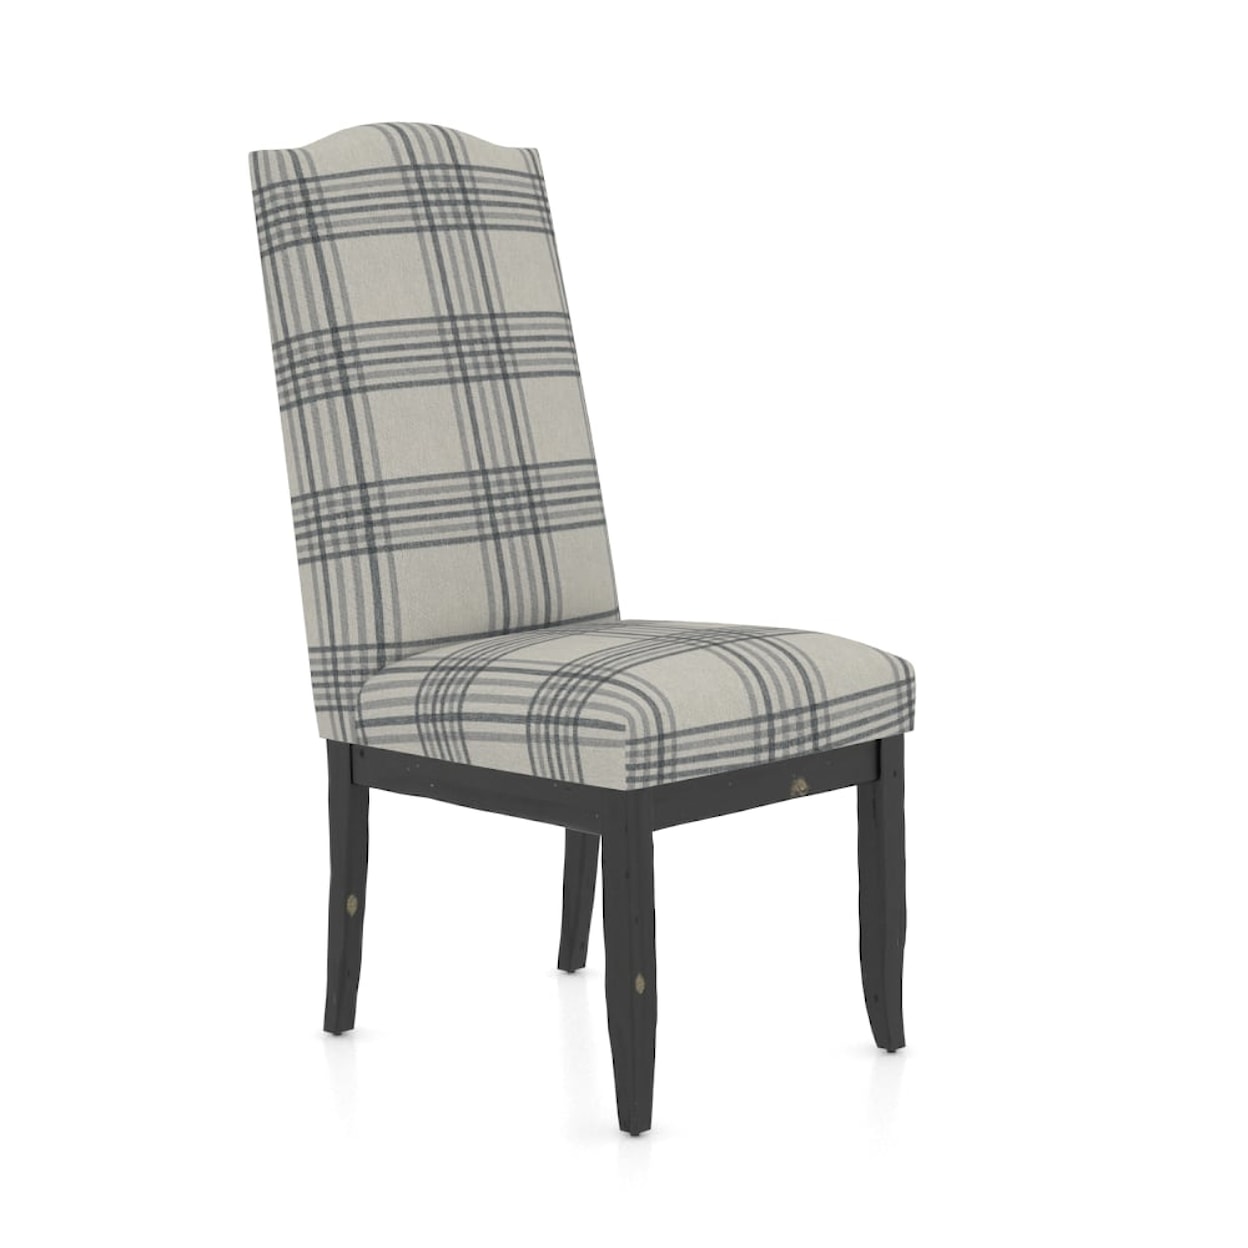 Canadel Champlain. Customizable Upholstered Side Chair